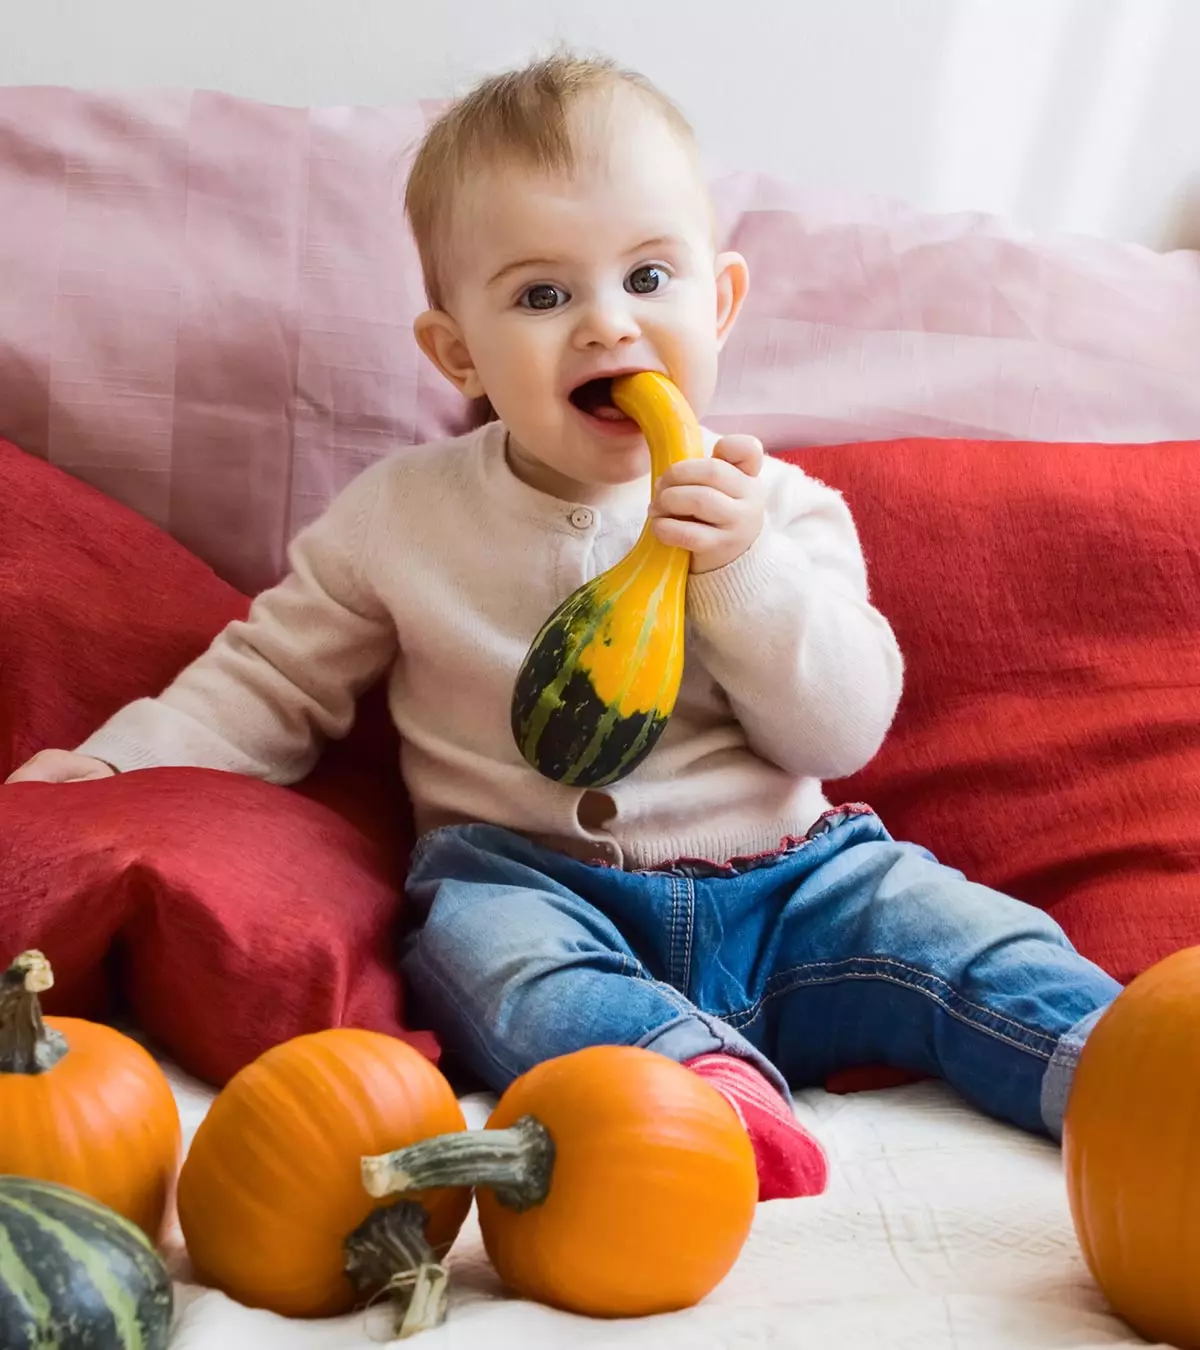 Pumpkin For Babies: Health Benefits, Puree And Other Recipes